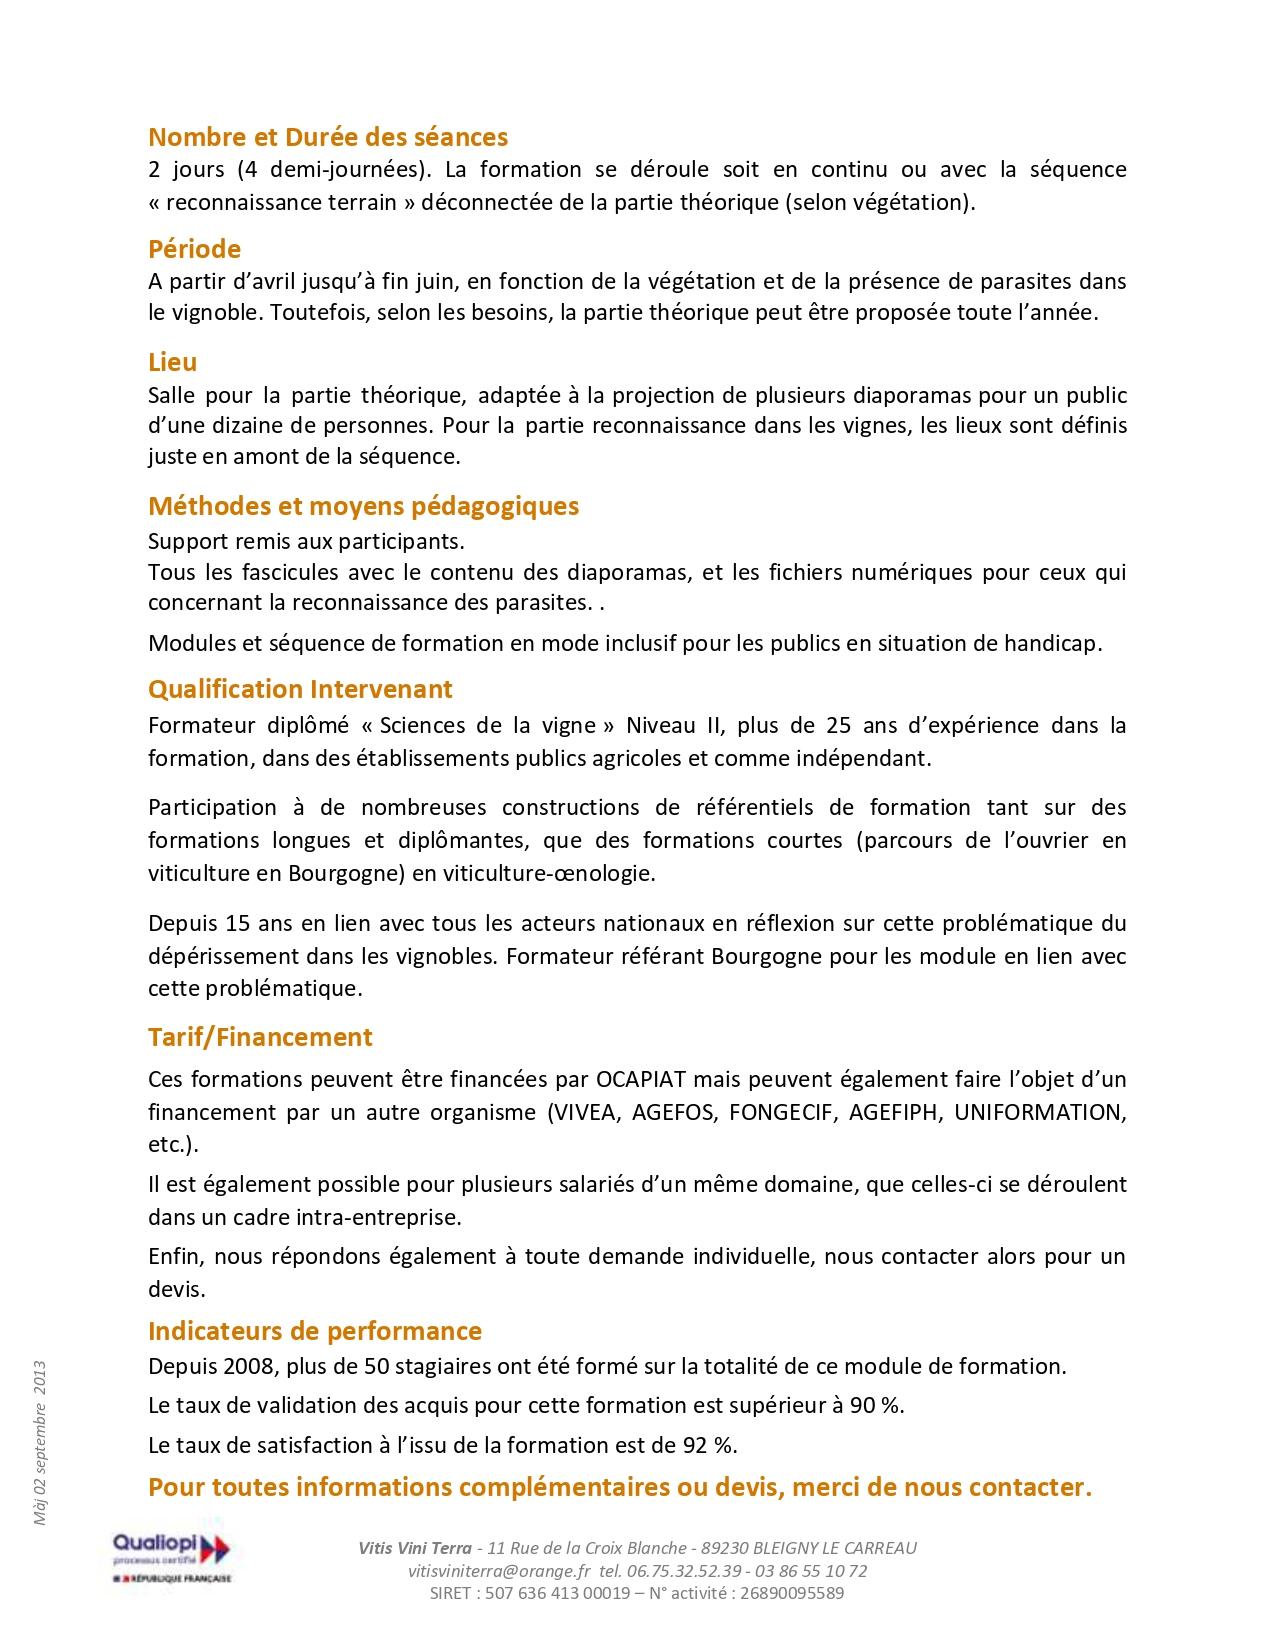 Fiche formation phyto page 0002